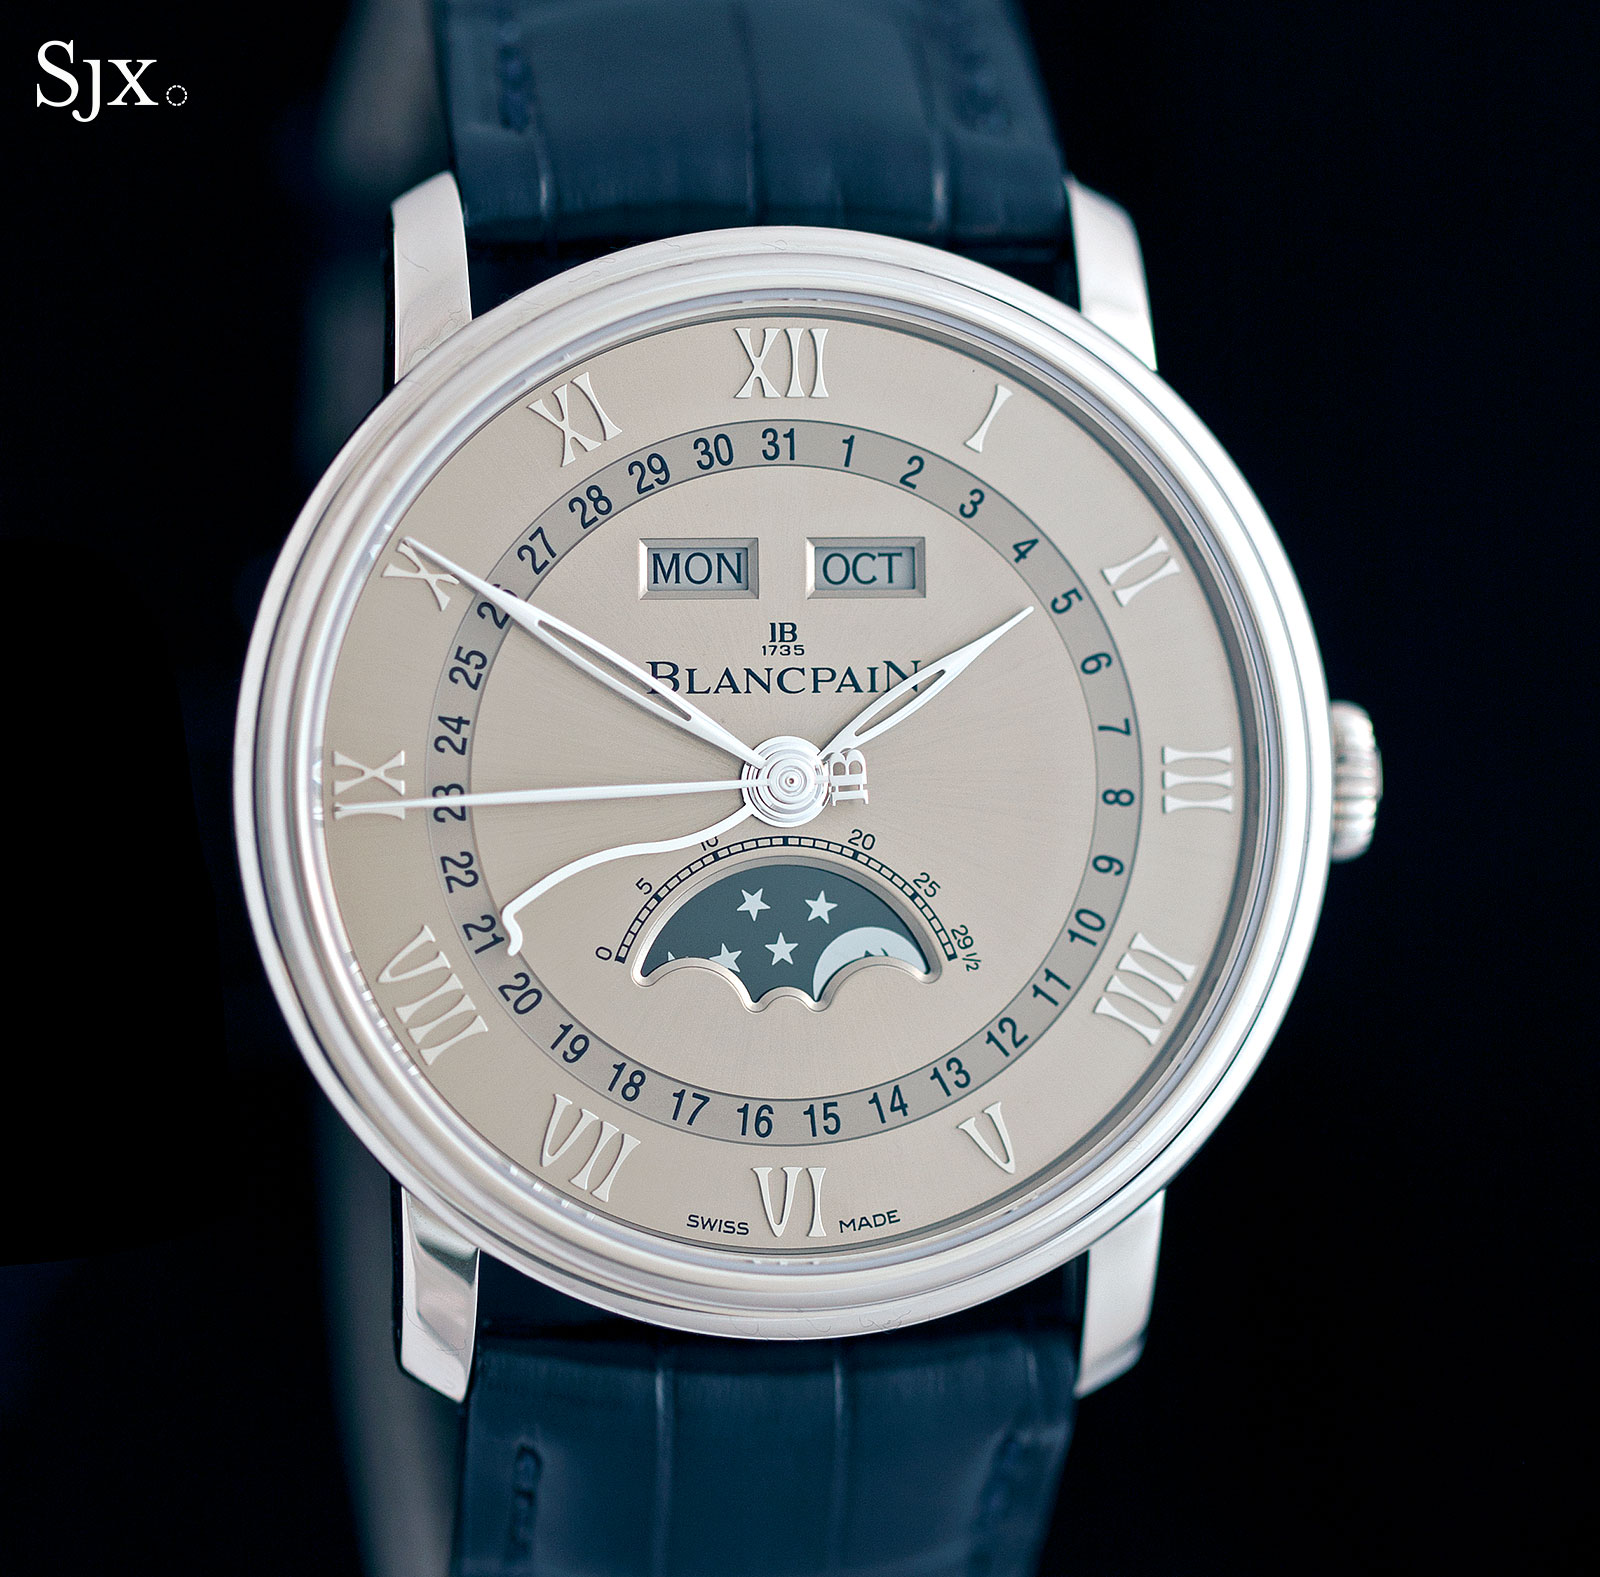 Up Close with the Blancpain Villeret Complete Calendar 40mm SJX Watches